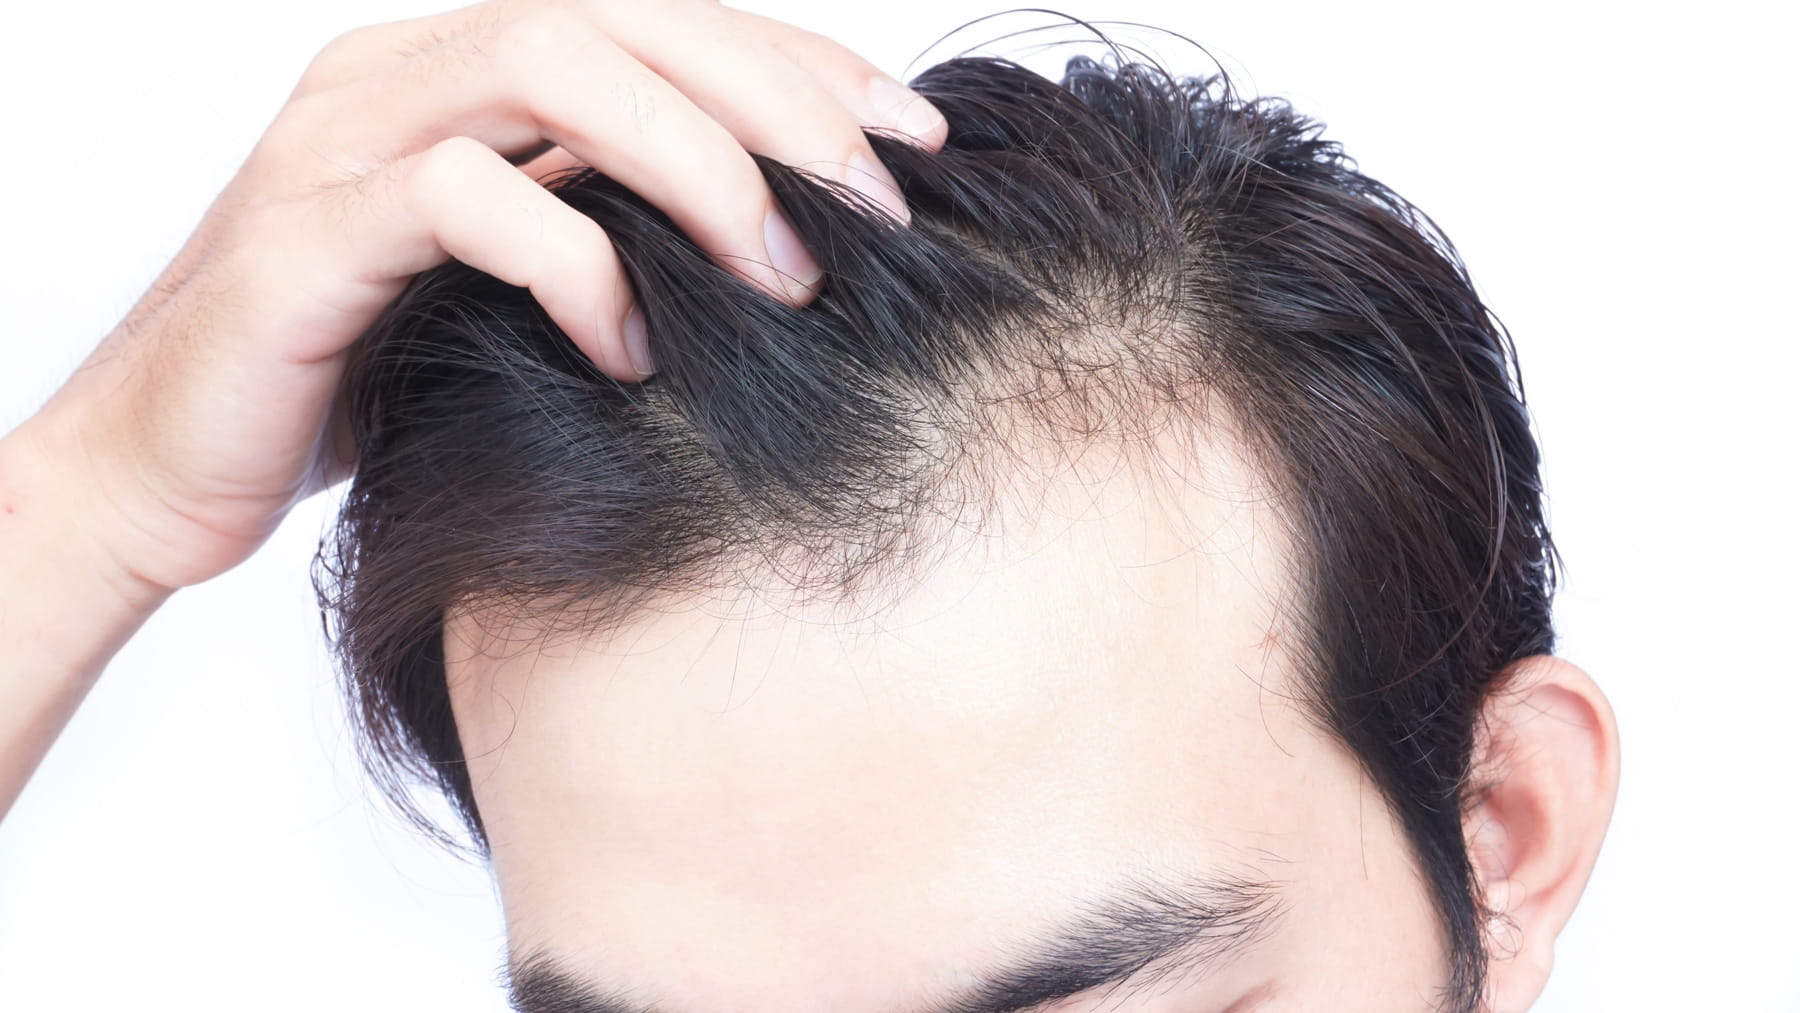 Natural Hair Growth Solutions That Work Better Than Minoxidil And Finasteride?